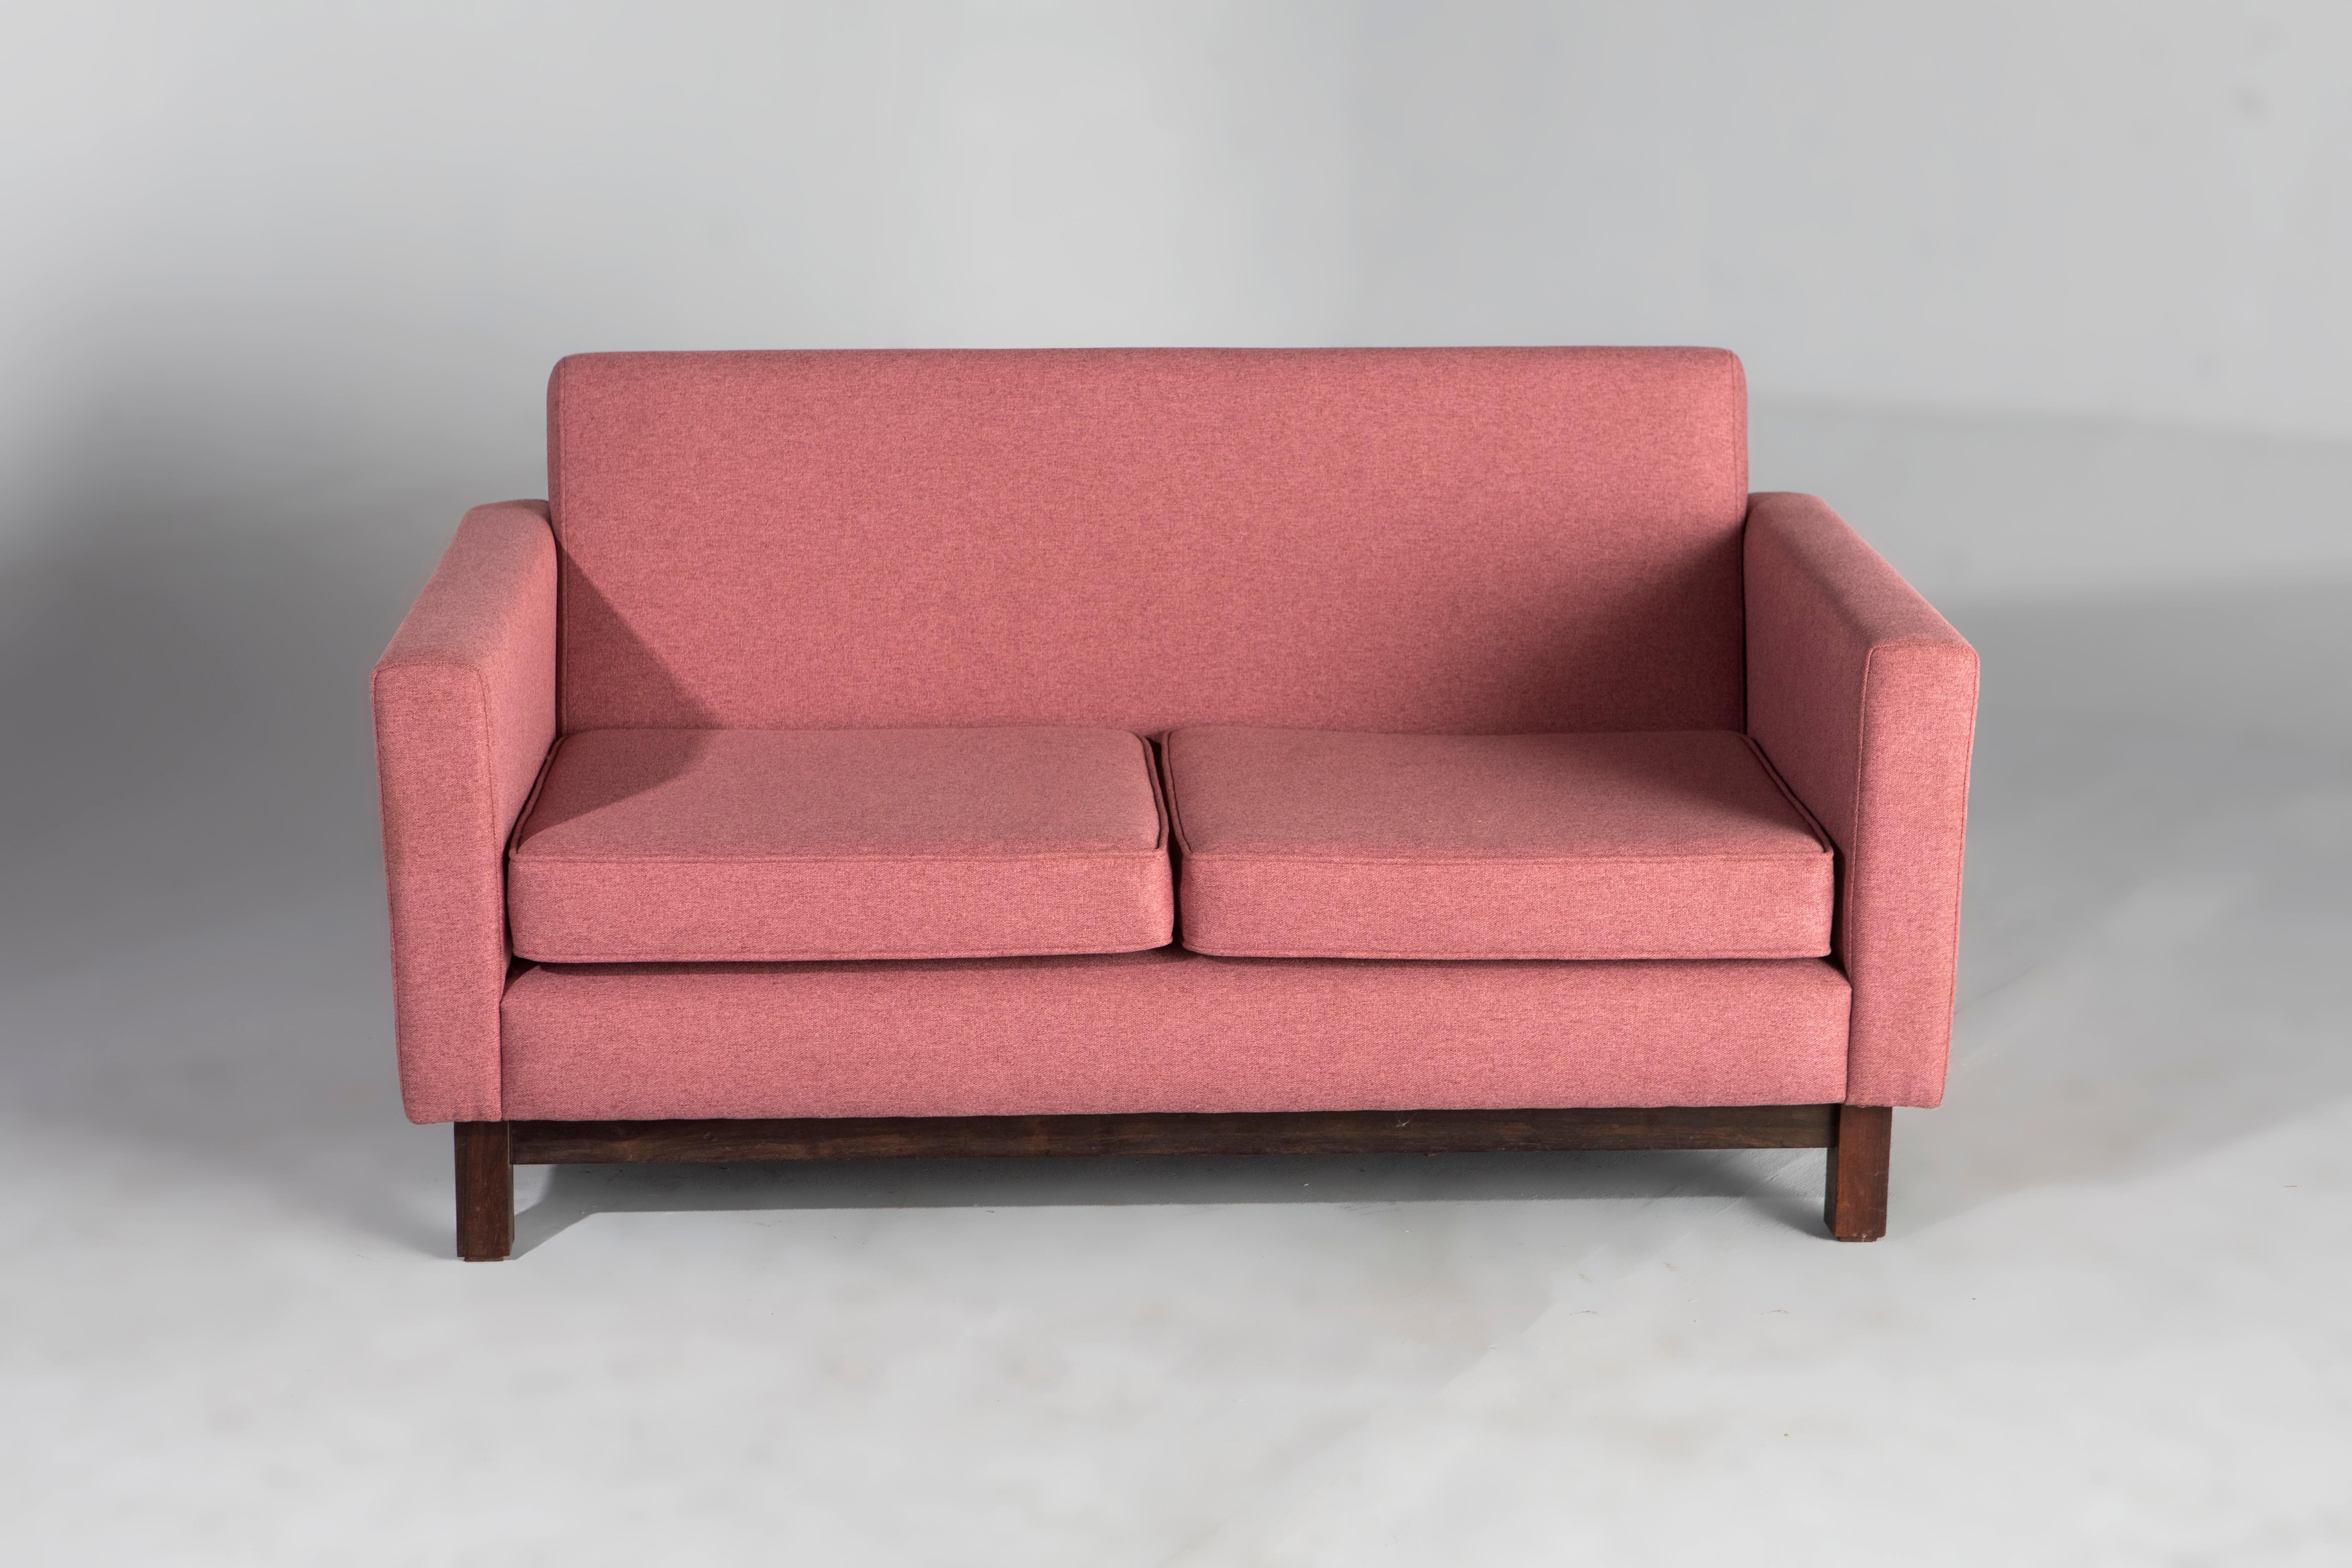 Brazilian Mid-Century Modern Sofa by Sergio Rodrigues, Brazil 1960s For Sale